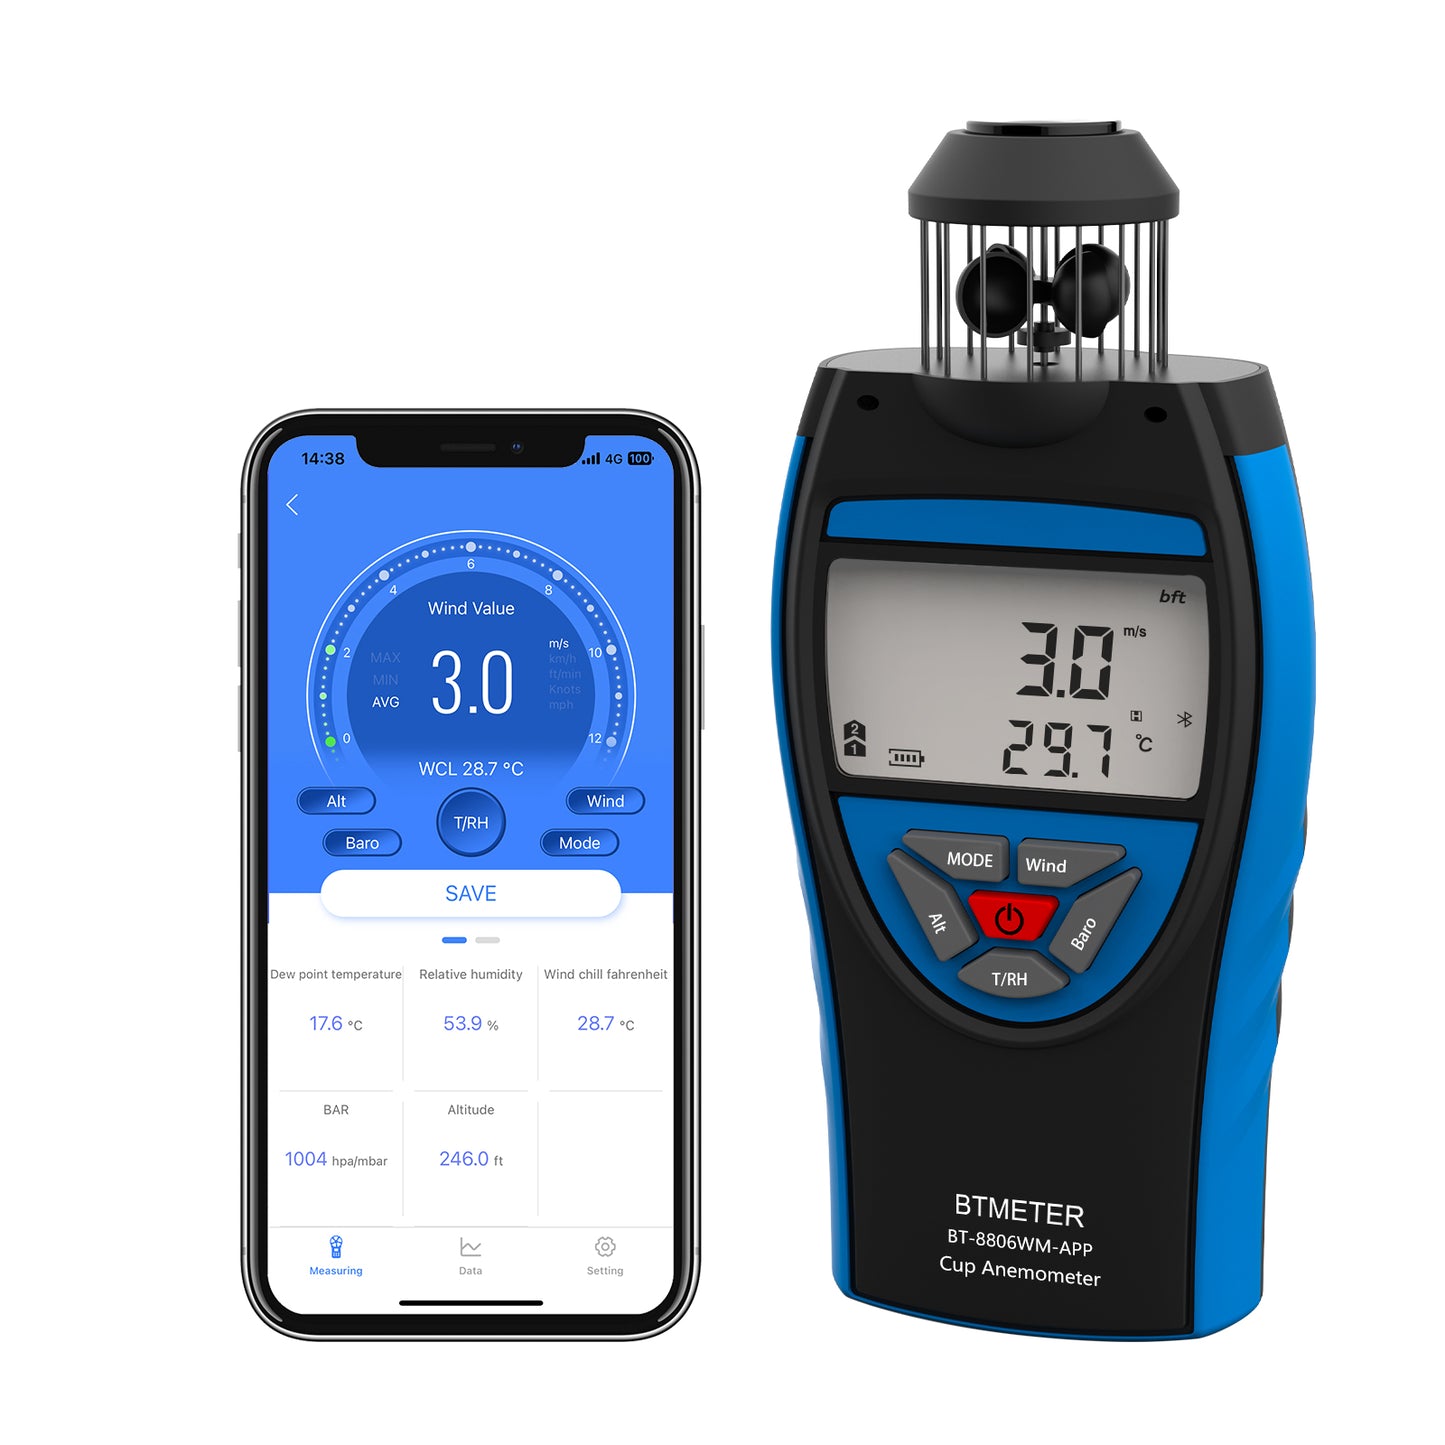 Btmeter Cup Anemometer Handheld Air Flow Meter, Wind Speed Data Logger w/Barometer Measure Wind Velocity/Temperature/Altitude/Humidity for HVAC Air Ventilation, Drone Hiking Outdoor Activities